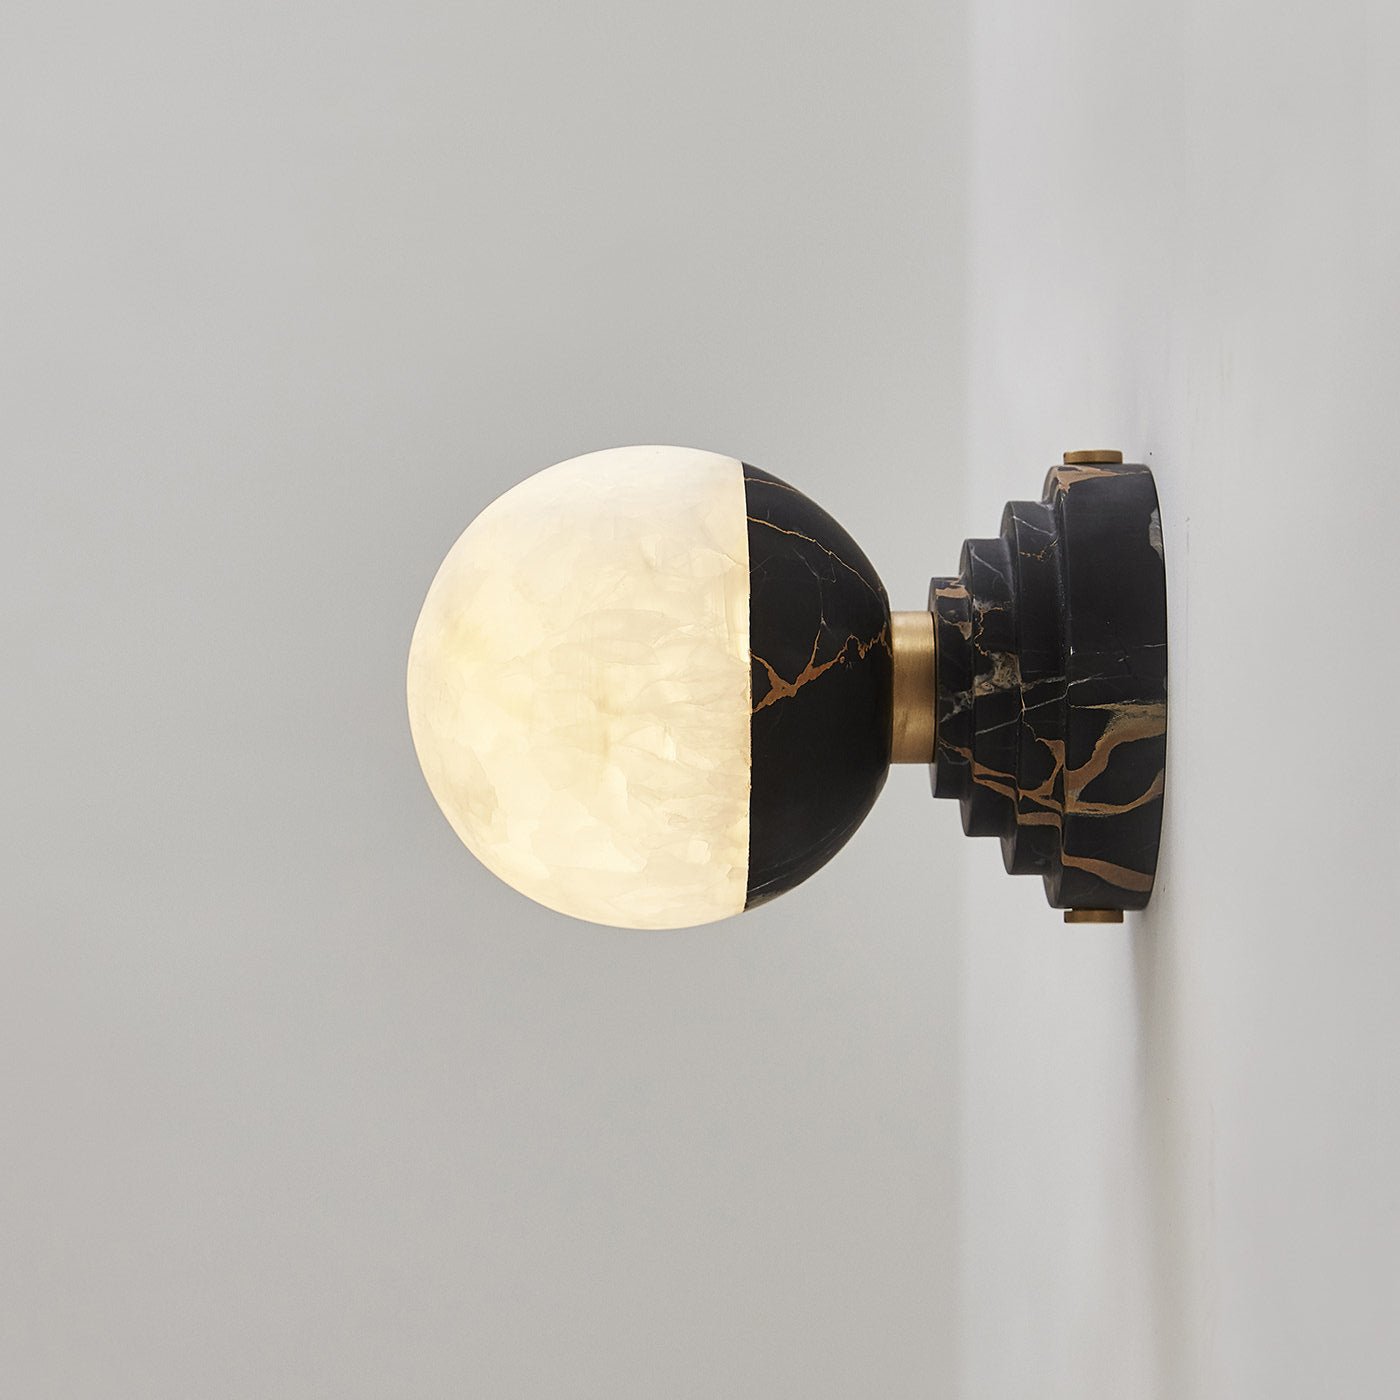 Lunar Sconce in Portoro Marble and Onyx  - Alternative view 1